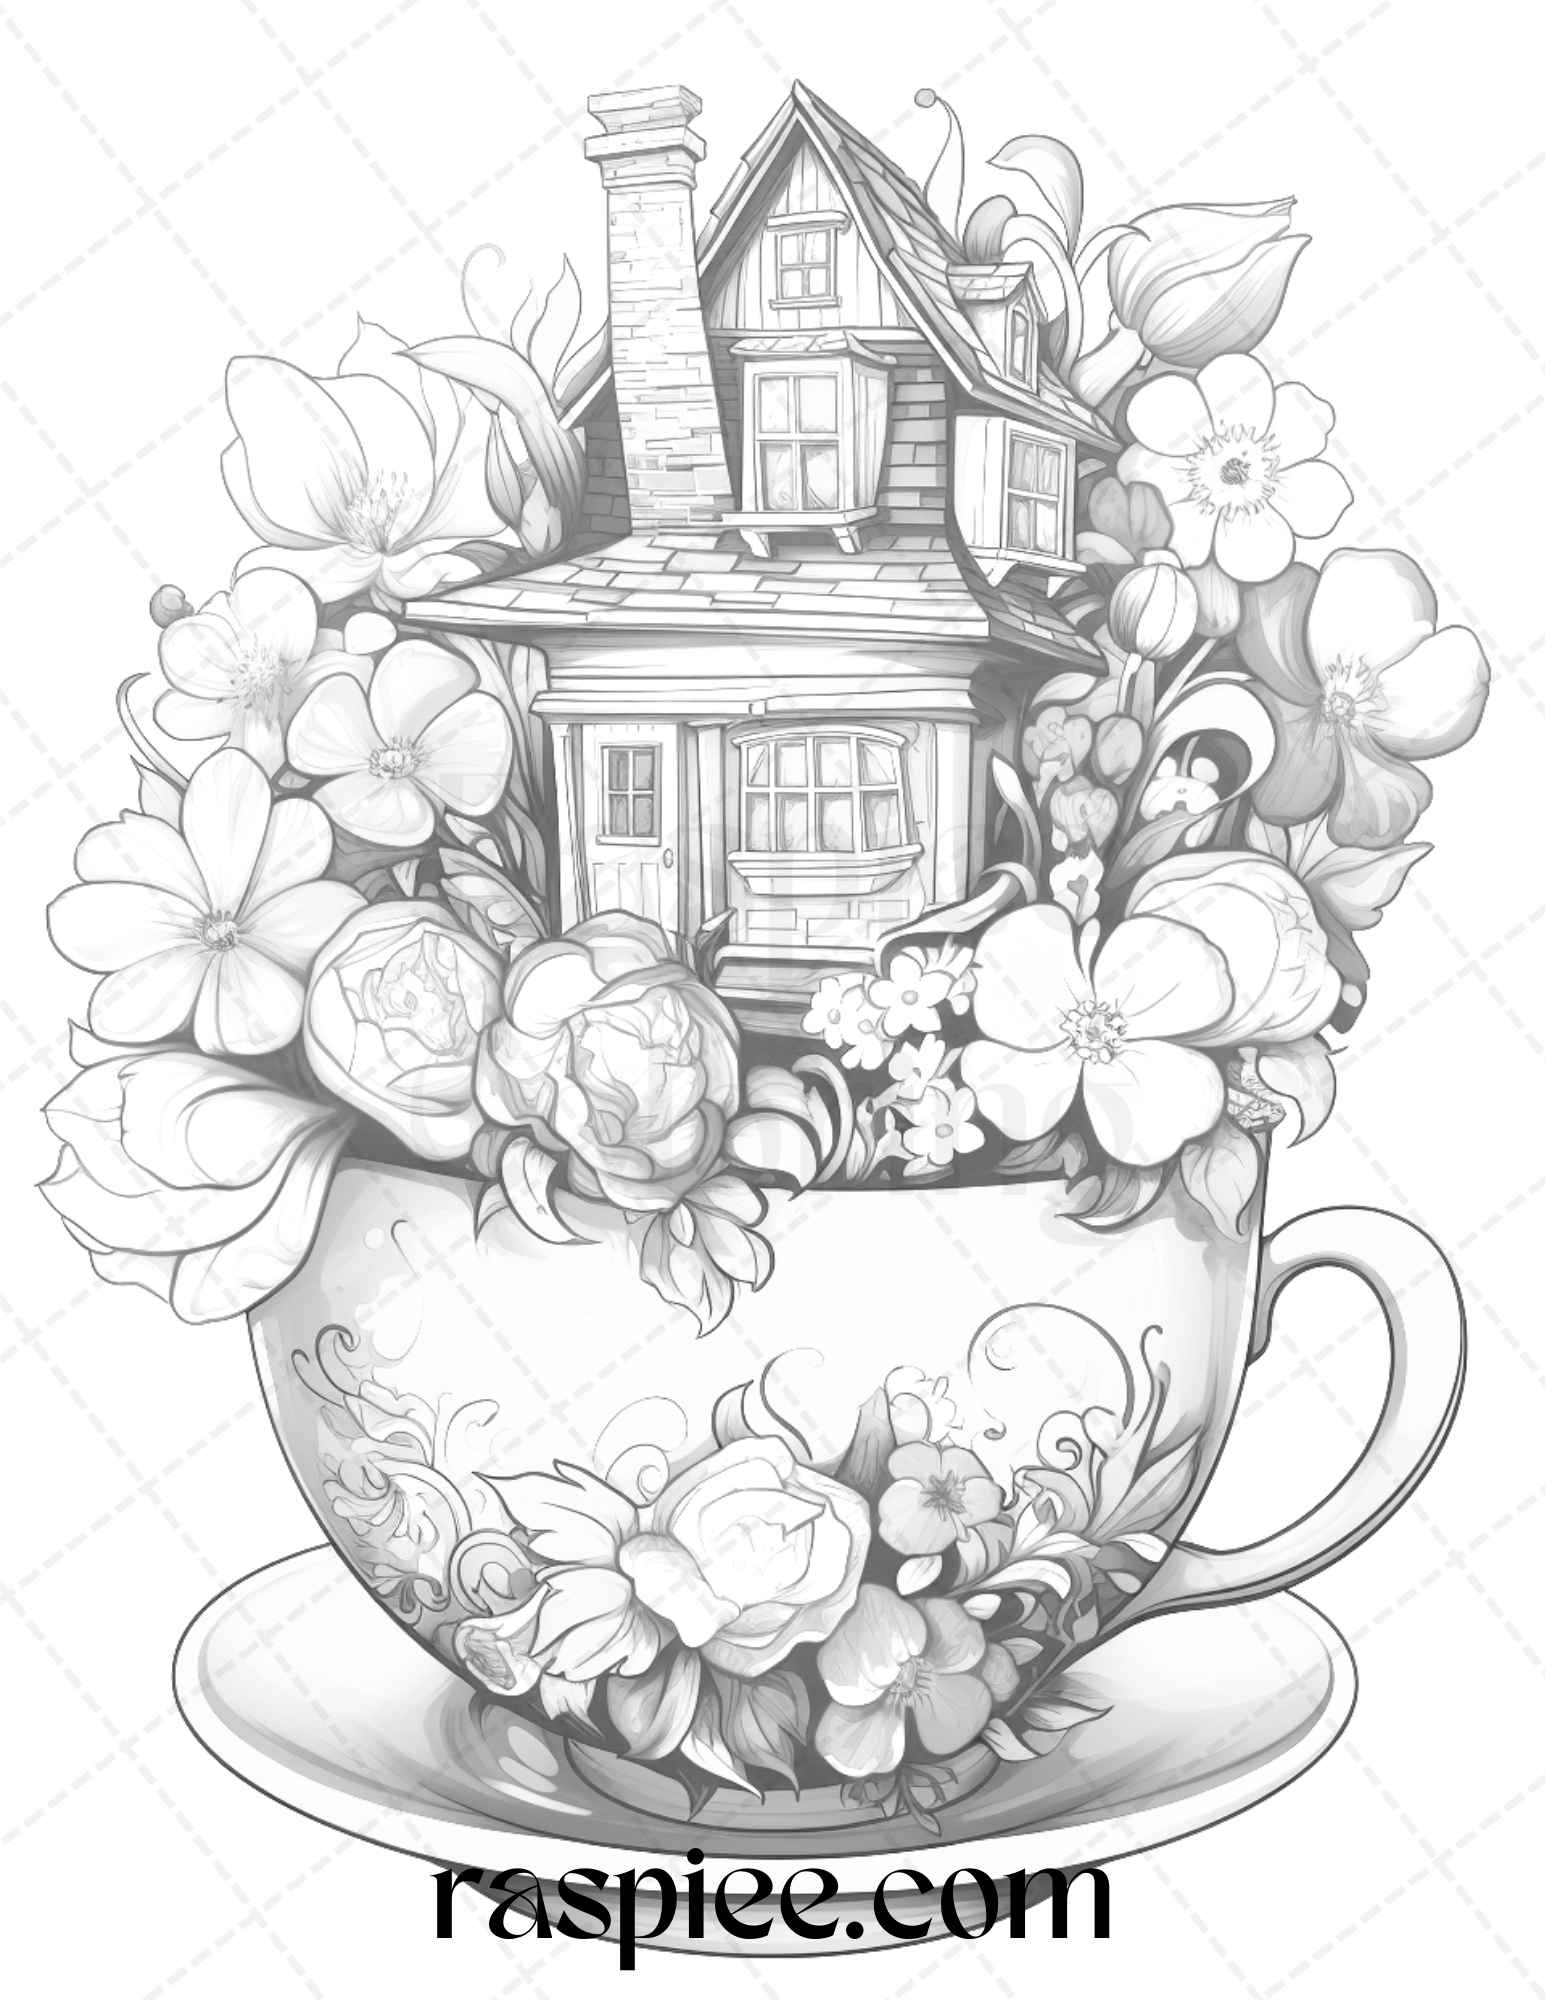 40 Flower Teacup Fairy Houses Grayscale Coloring Pages Printable for Adults, PDF File Instant Download - Raspiee Coloring